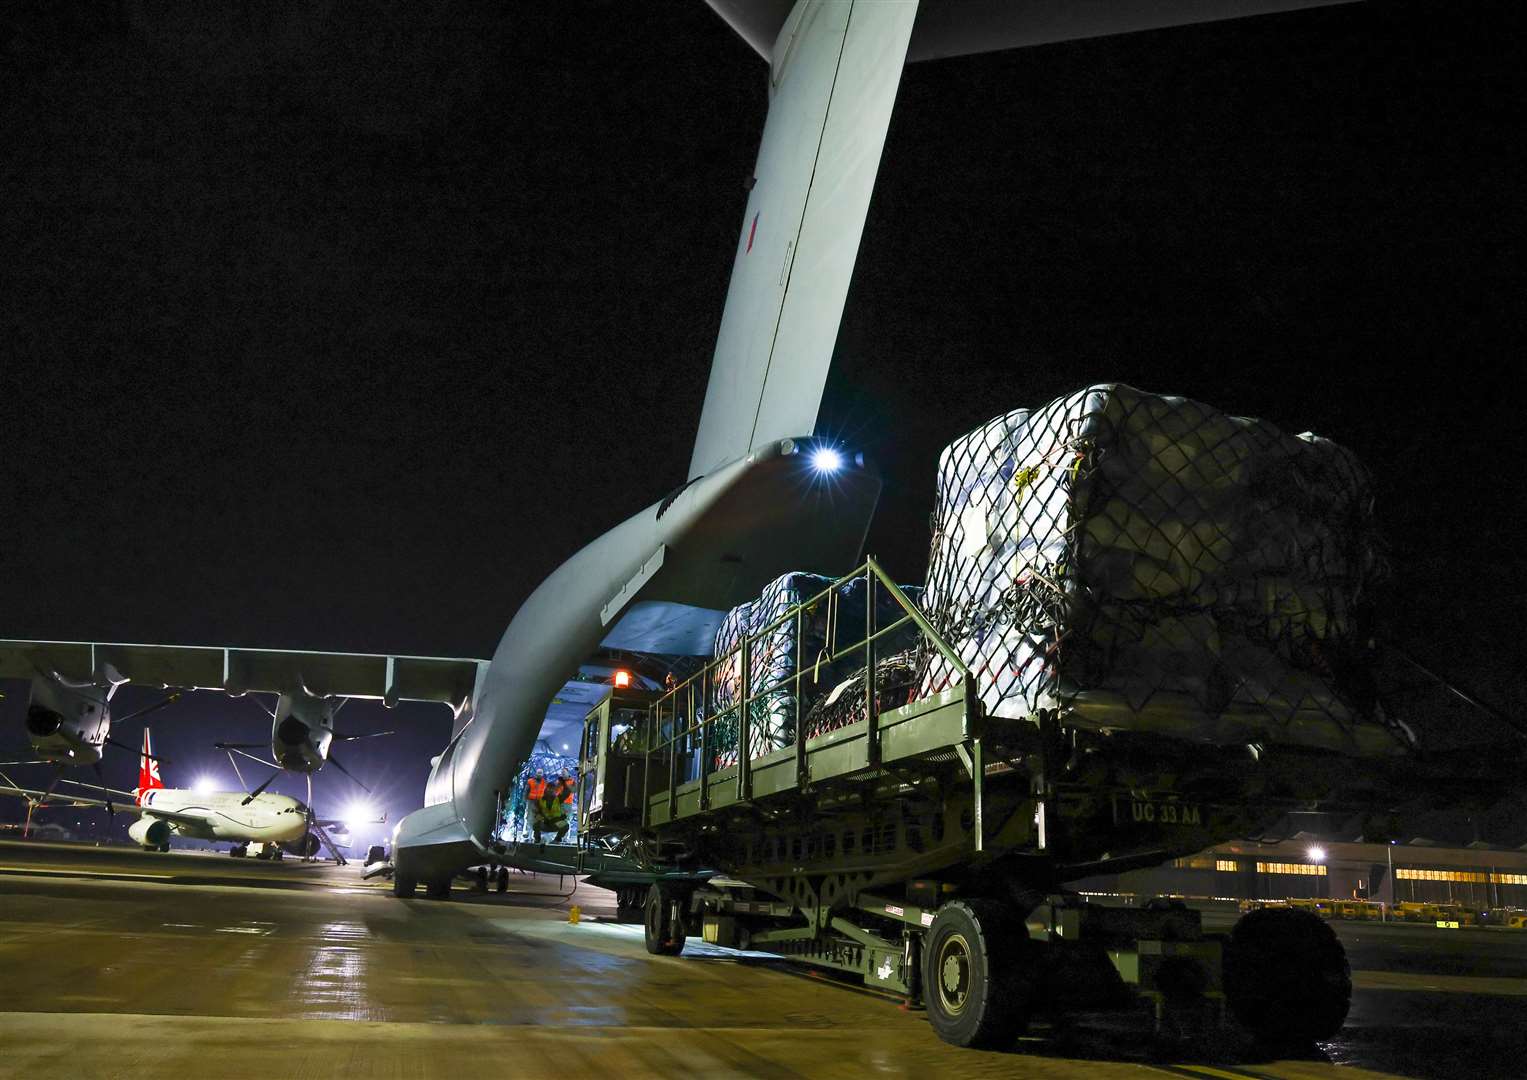 Humanitarian Aid being loaded onto aircraft at RAF Brize Norton ahead of being transported to Turkey in support of the earthquake in Turkey and Syria (Sharron Floyd/MoD/PA)